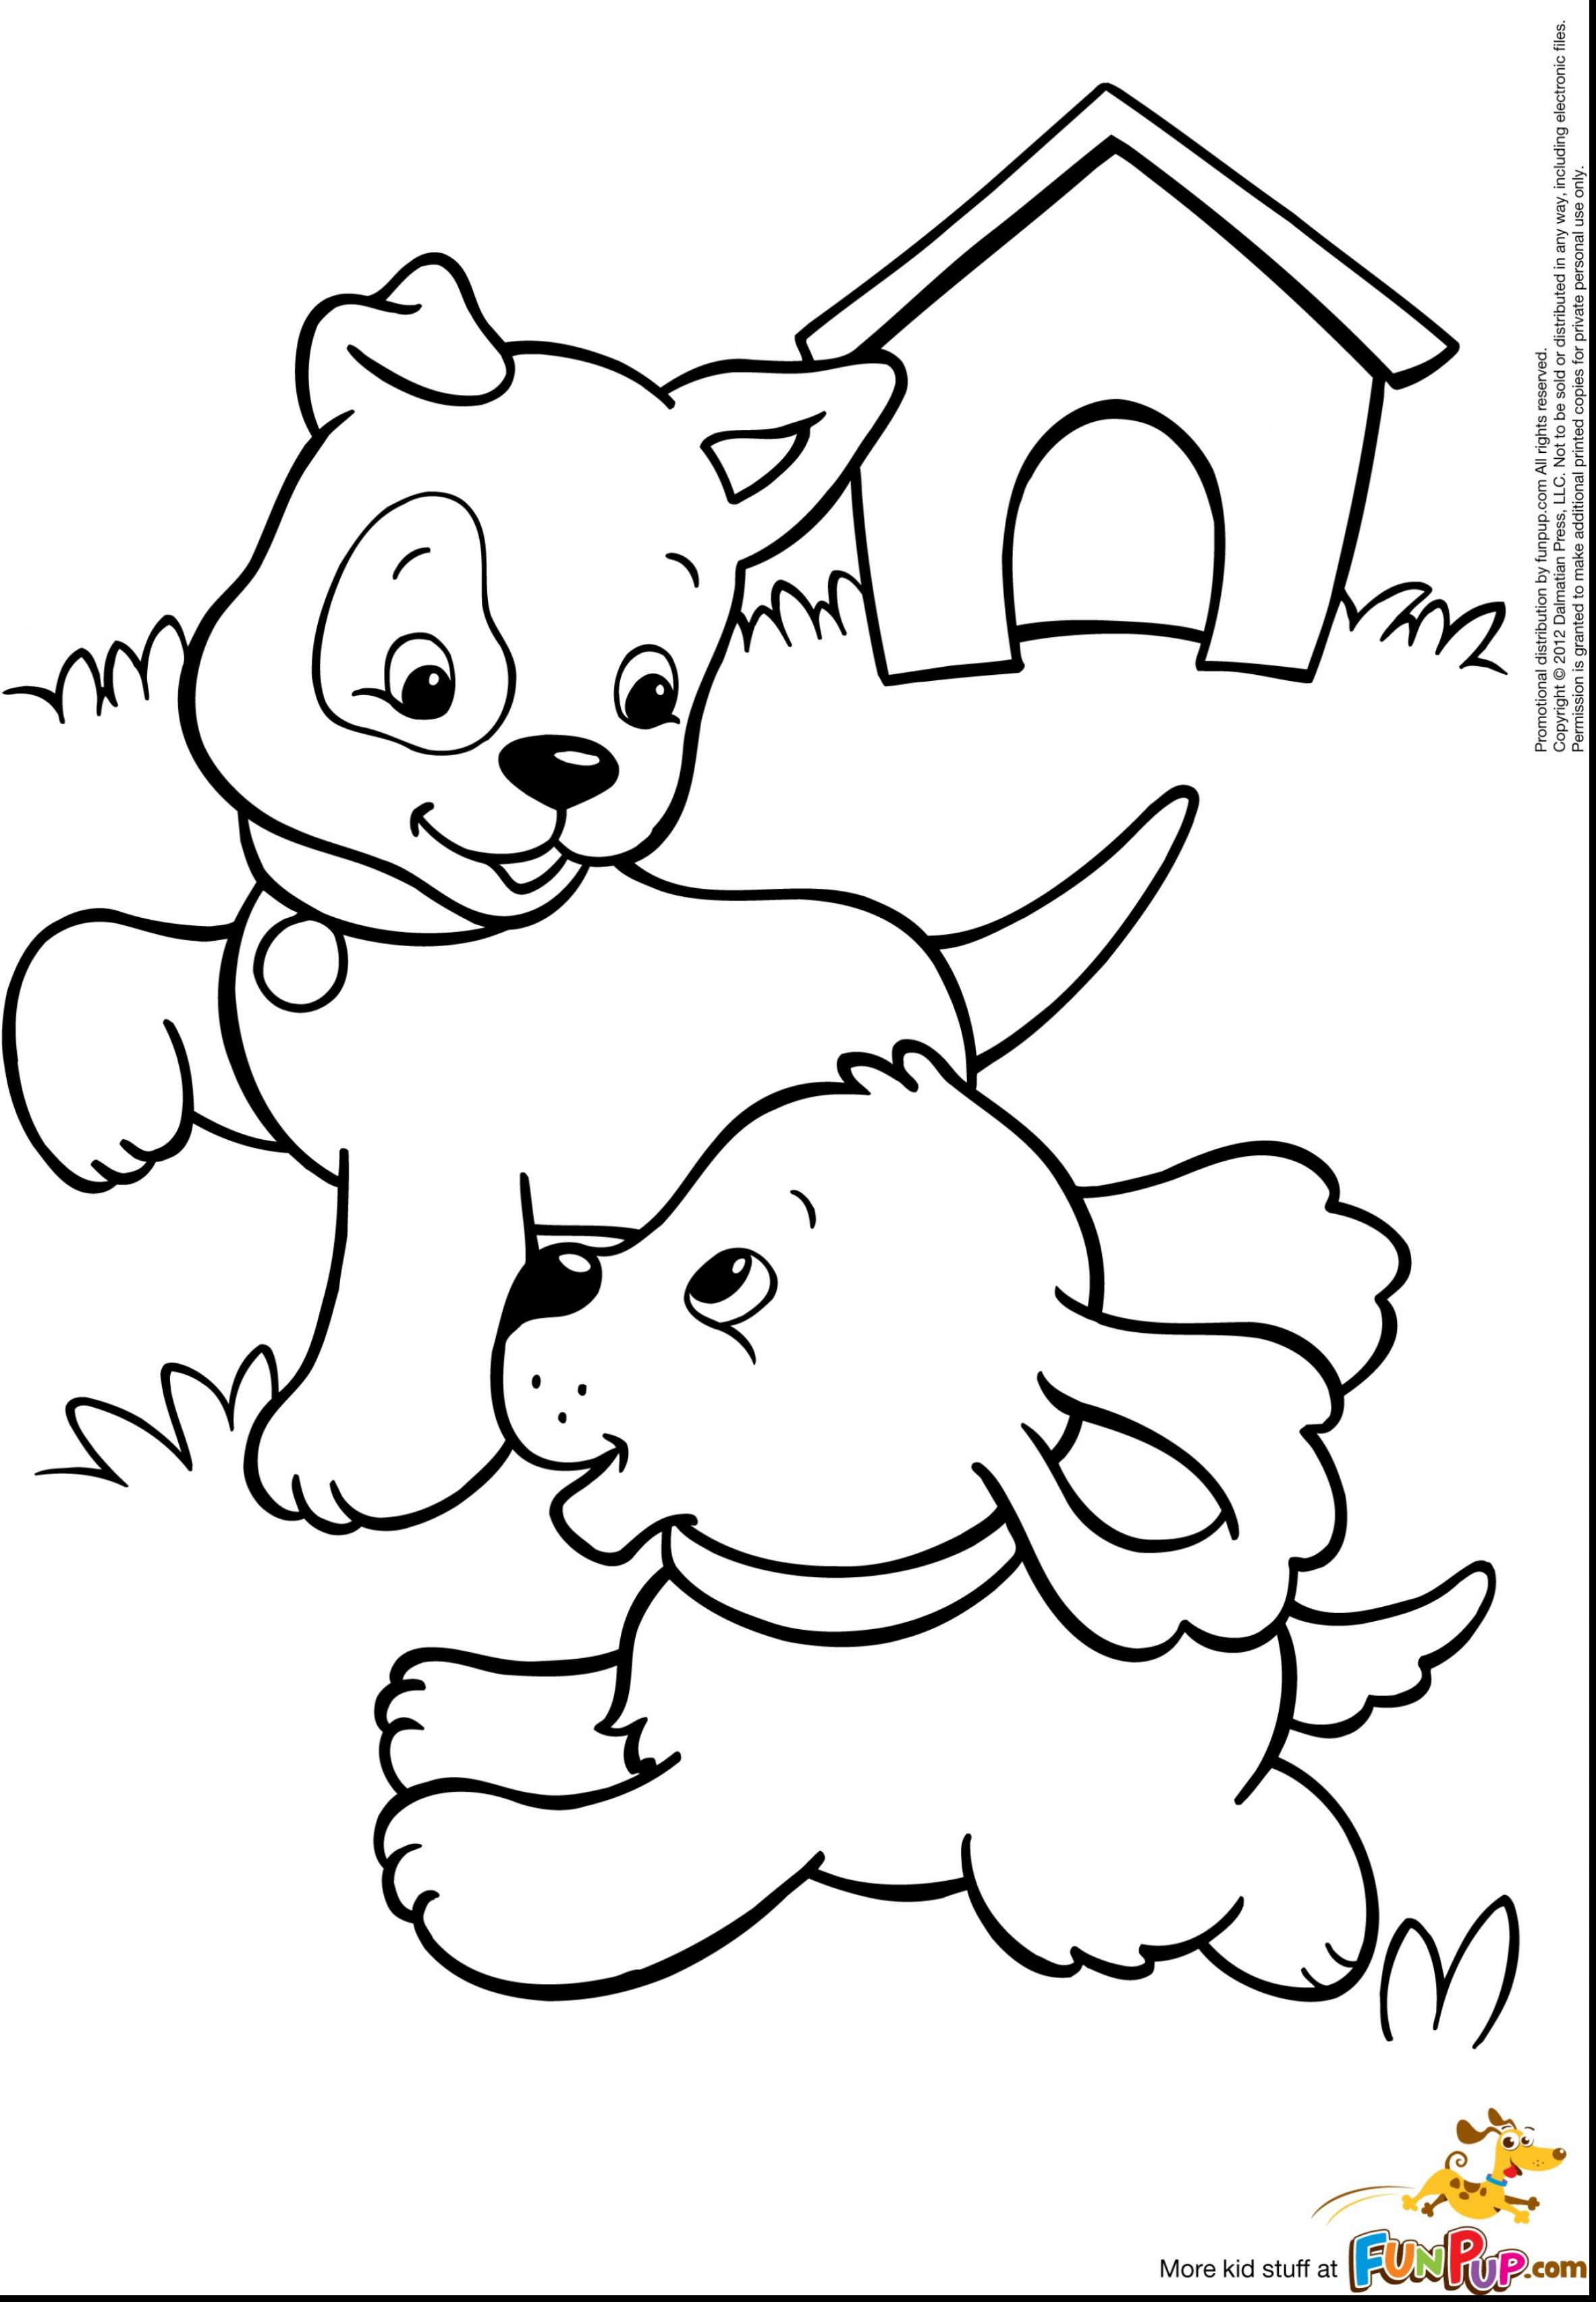 puppy-drawing-for-kids-at-getdrawings-free-download